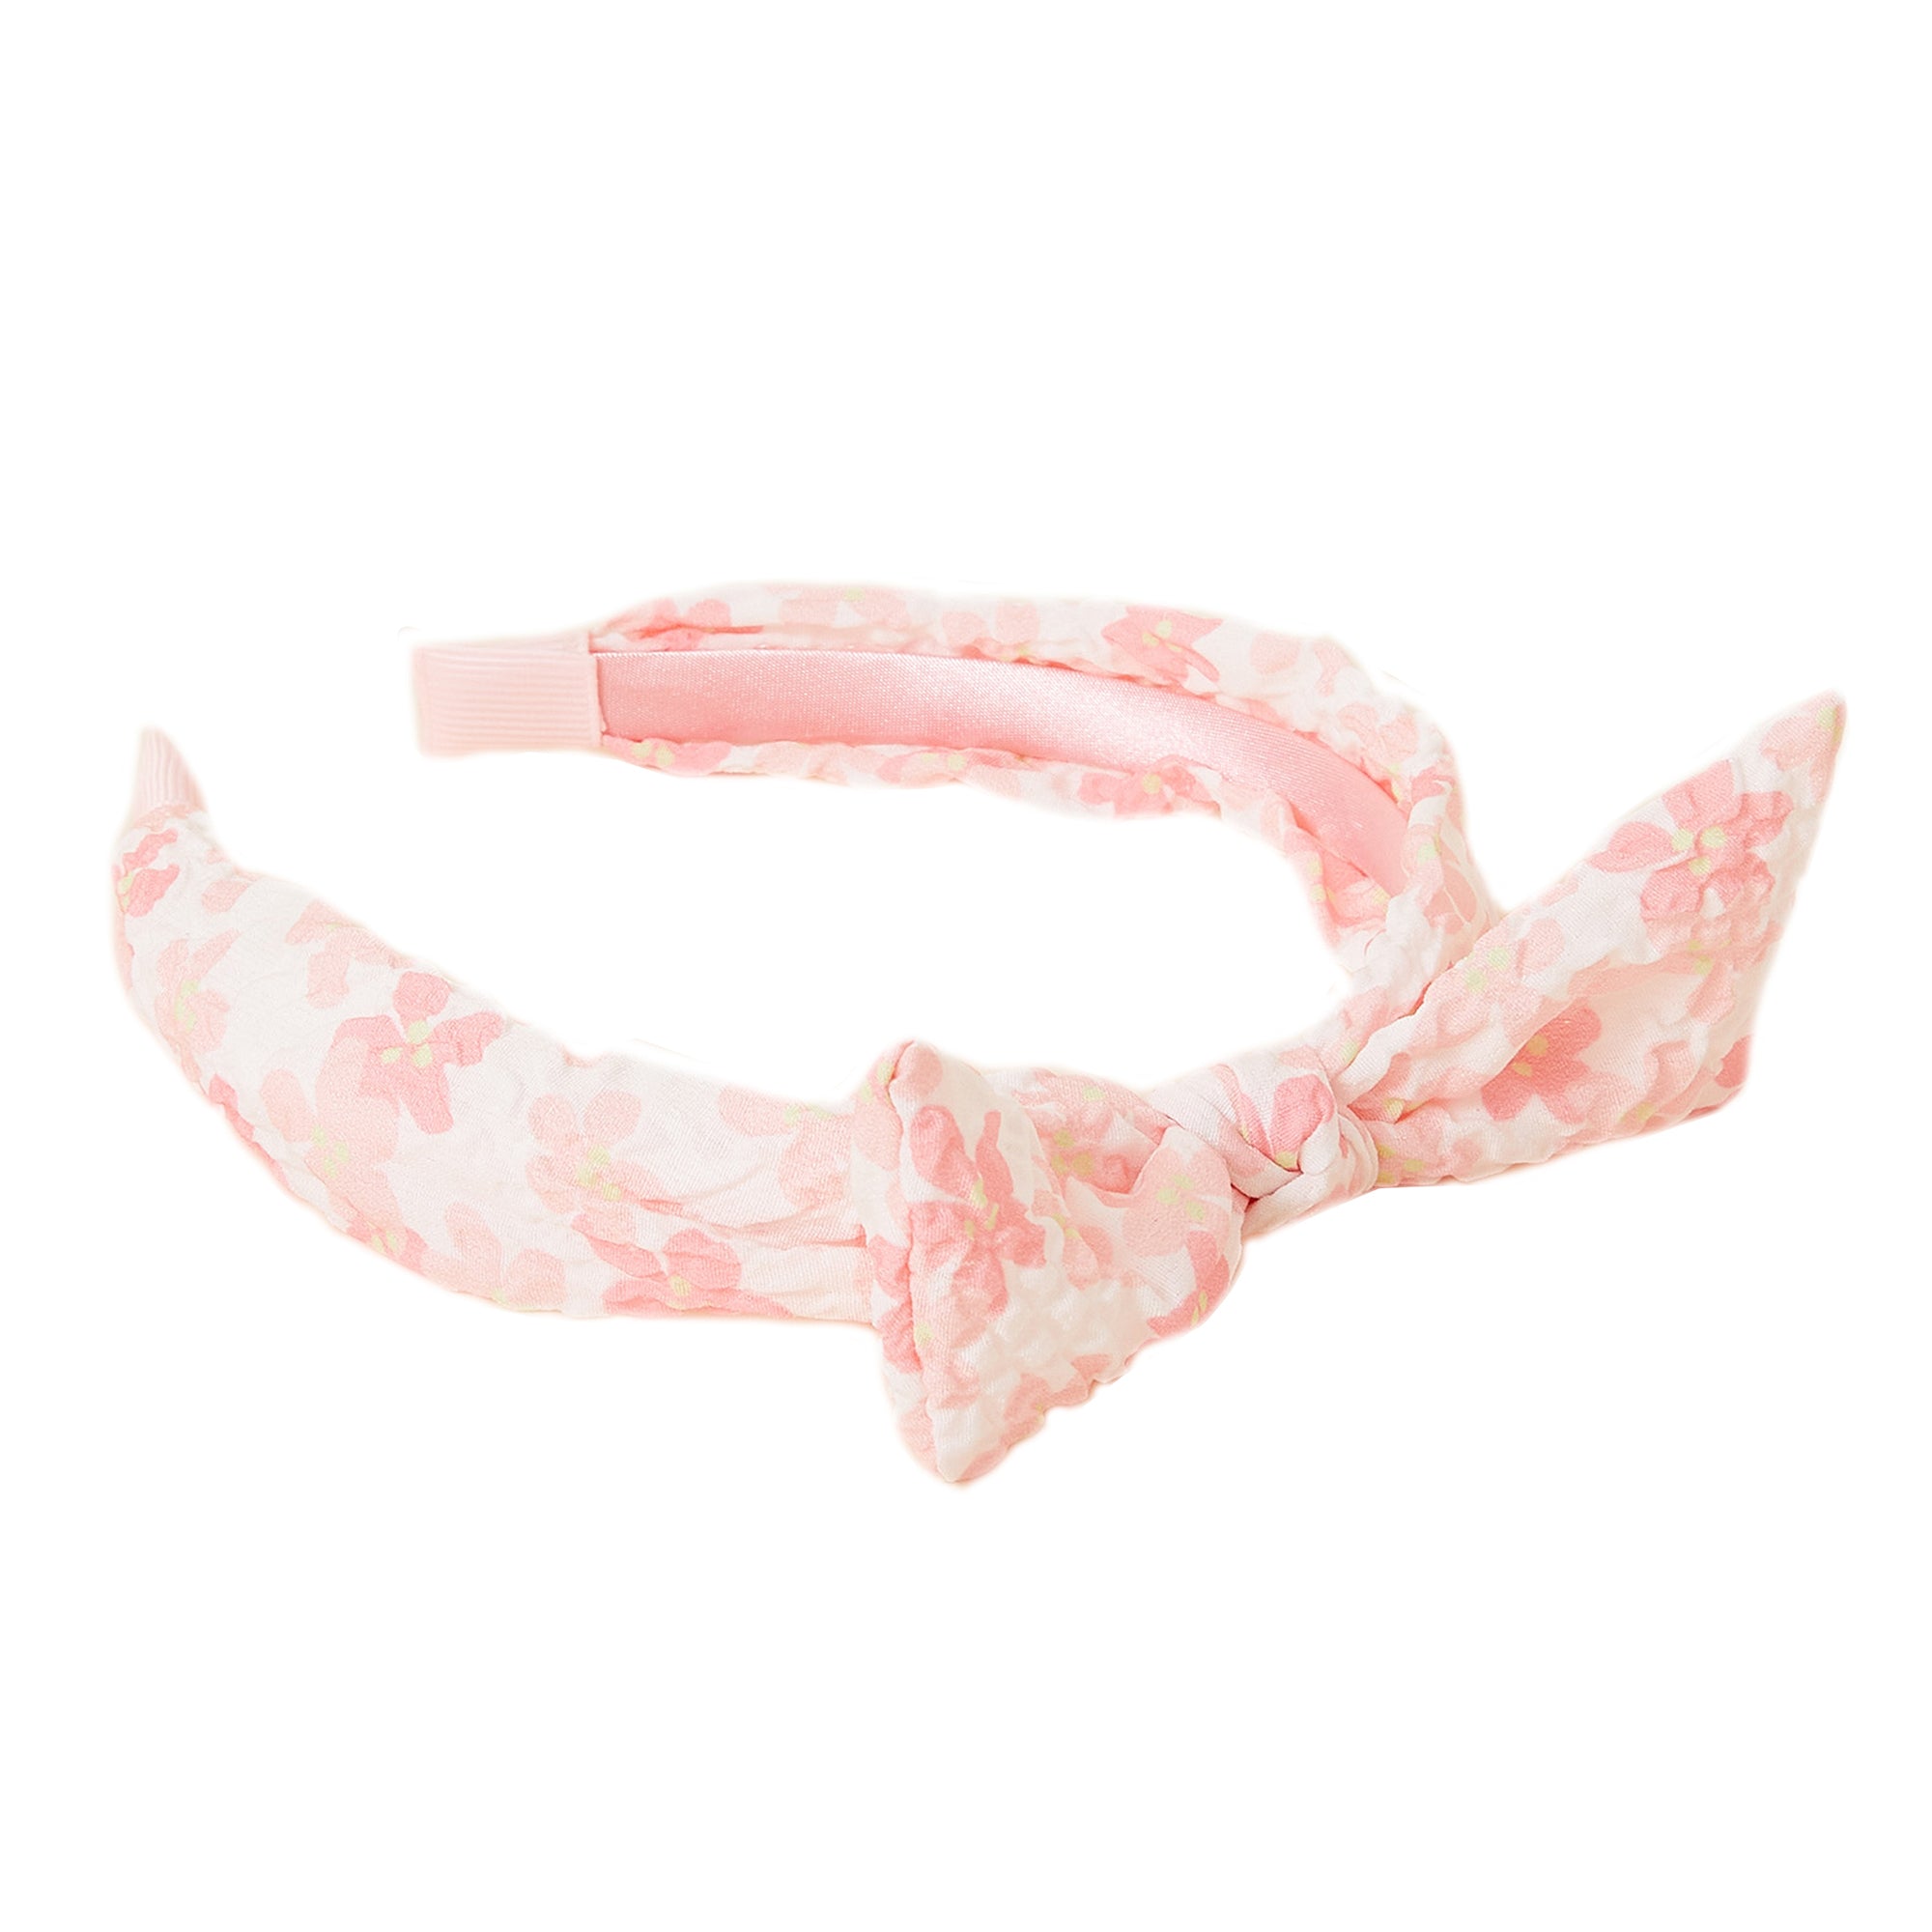 Accessorize London Girl's Printed Floral Alice Hair Band